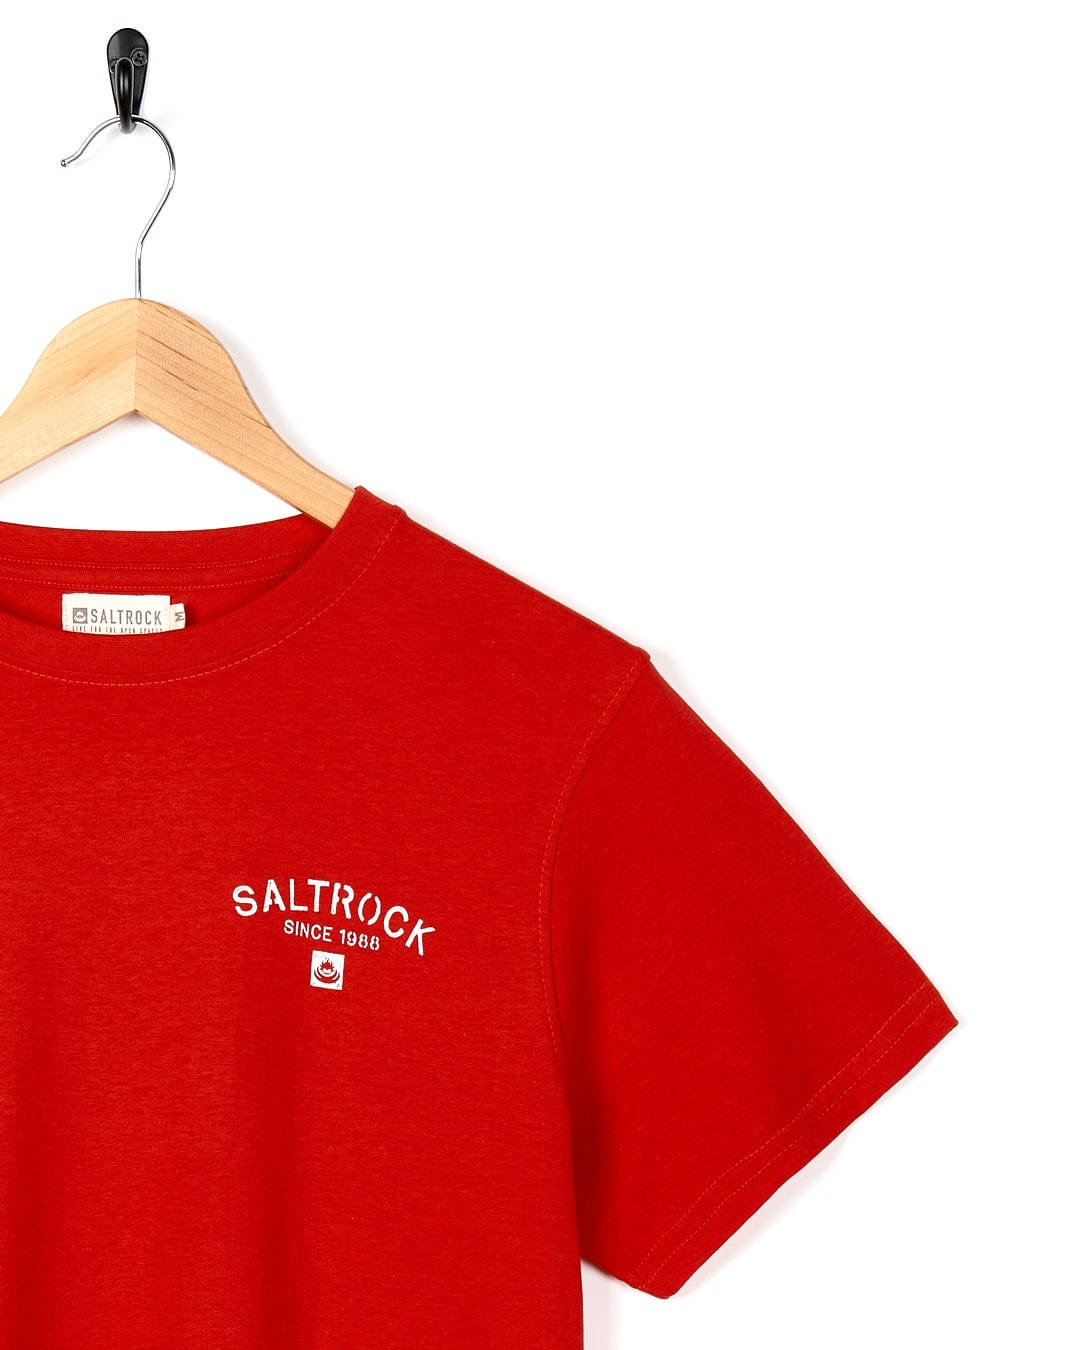 A Stencil - Mens Saundersfoot Location T-Shirt - Red with the brand name Saltrock on it.